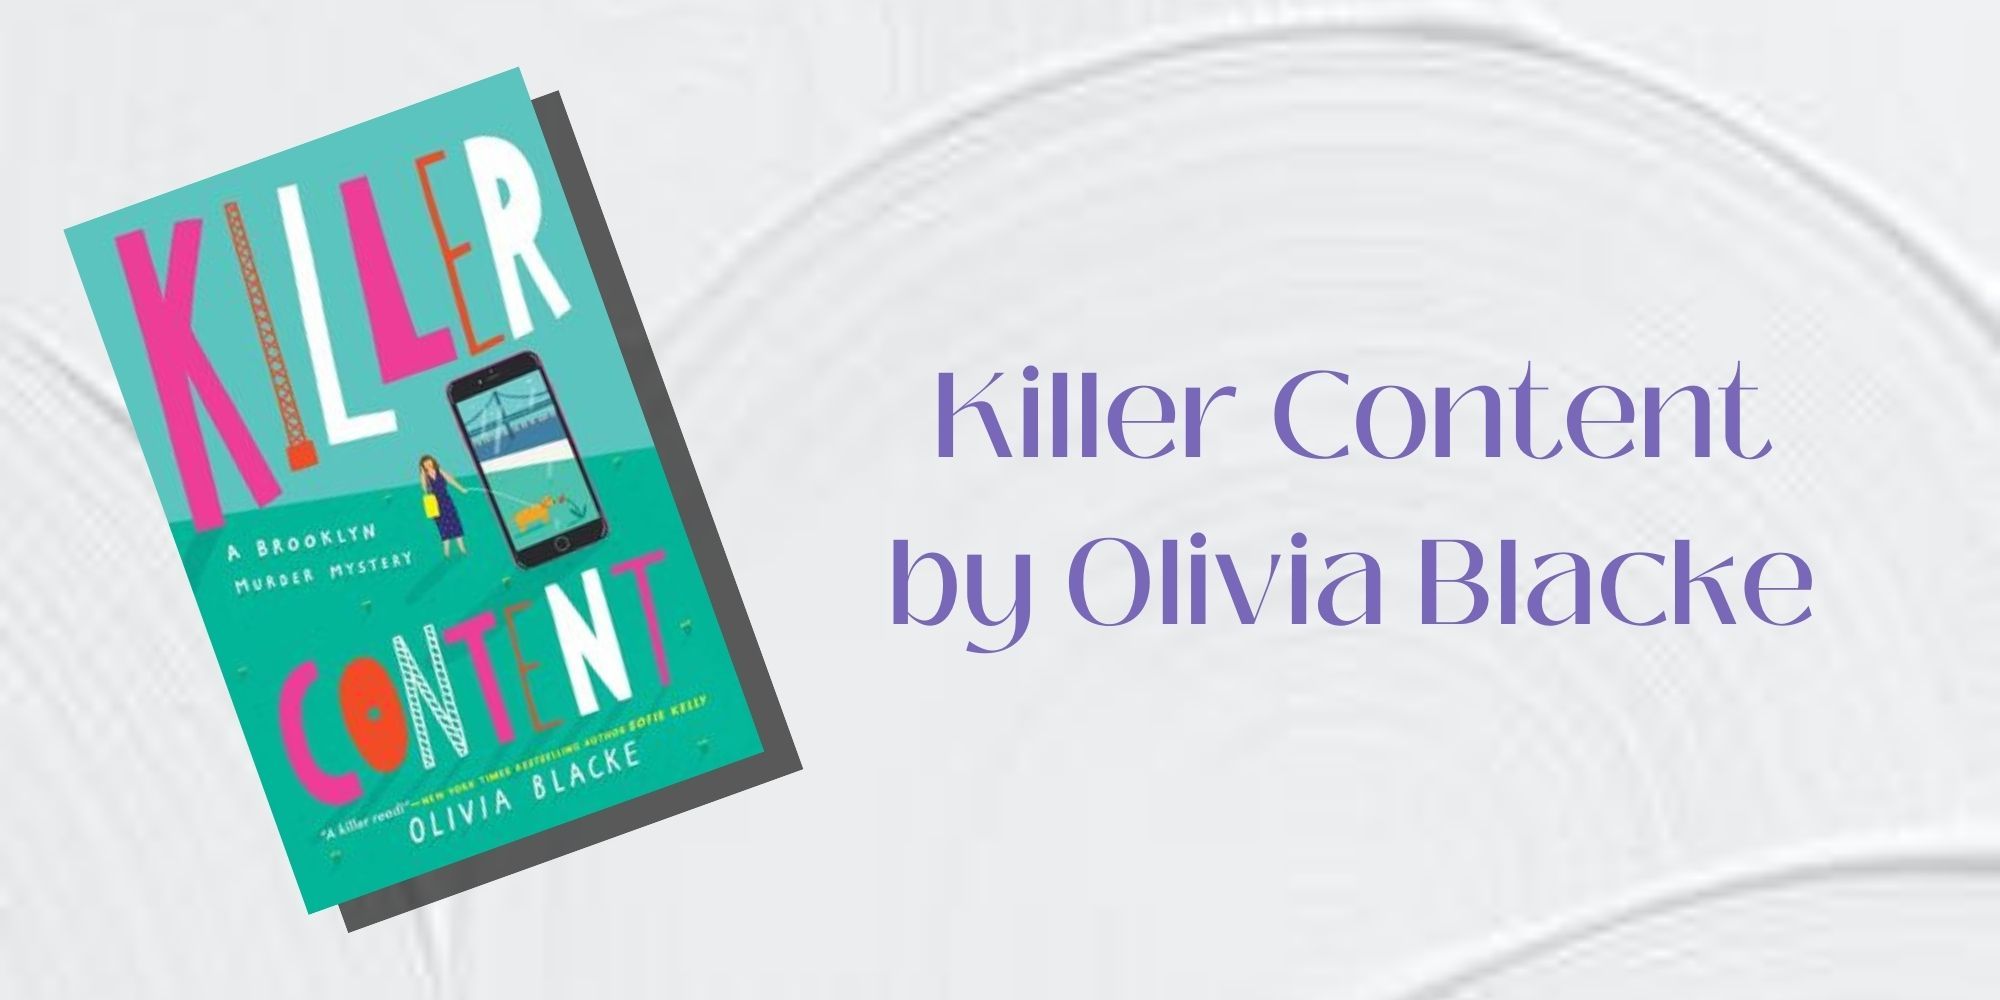 The cover of Killer Content by Olivia Blacke